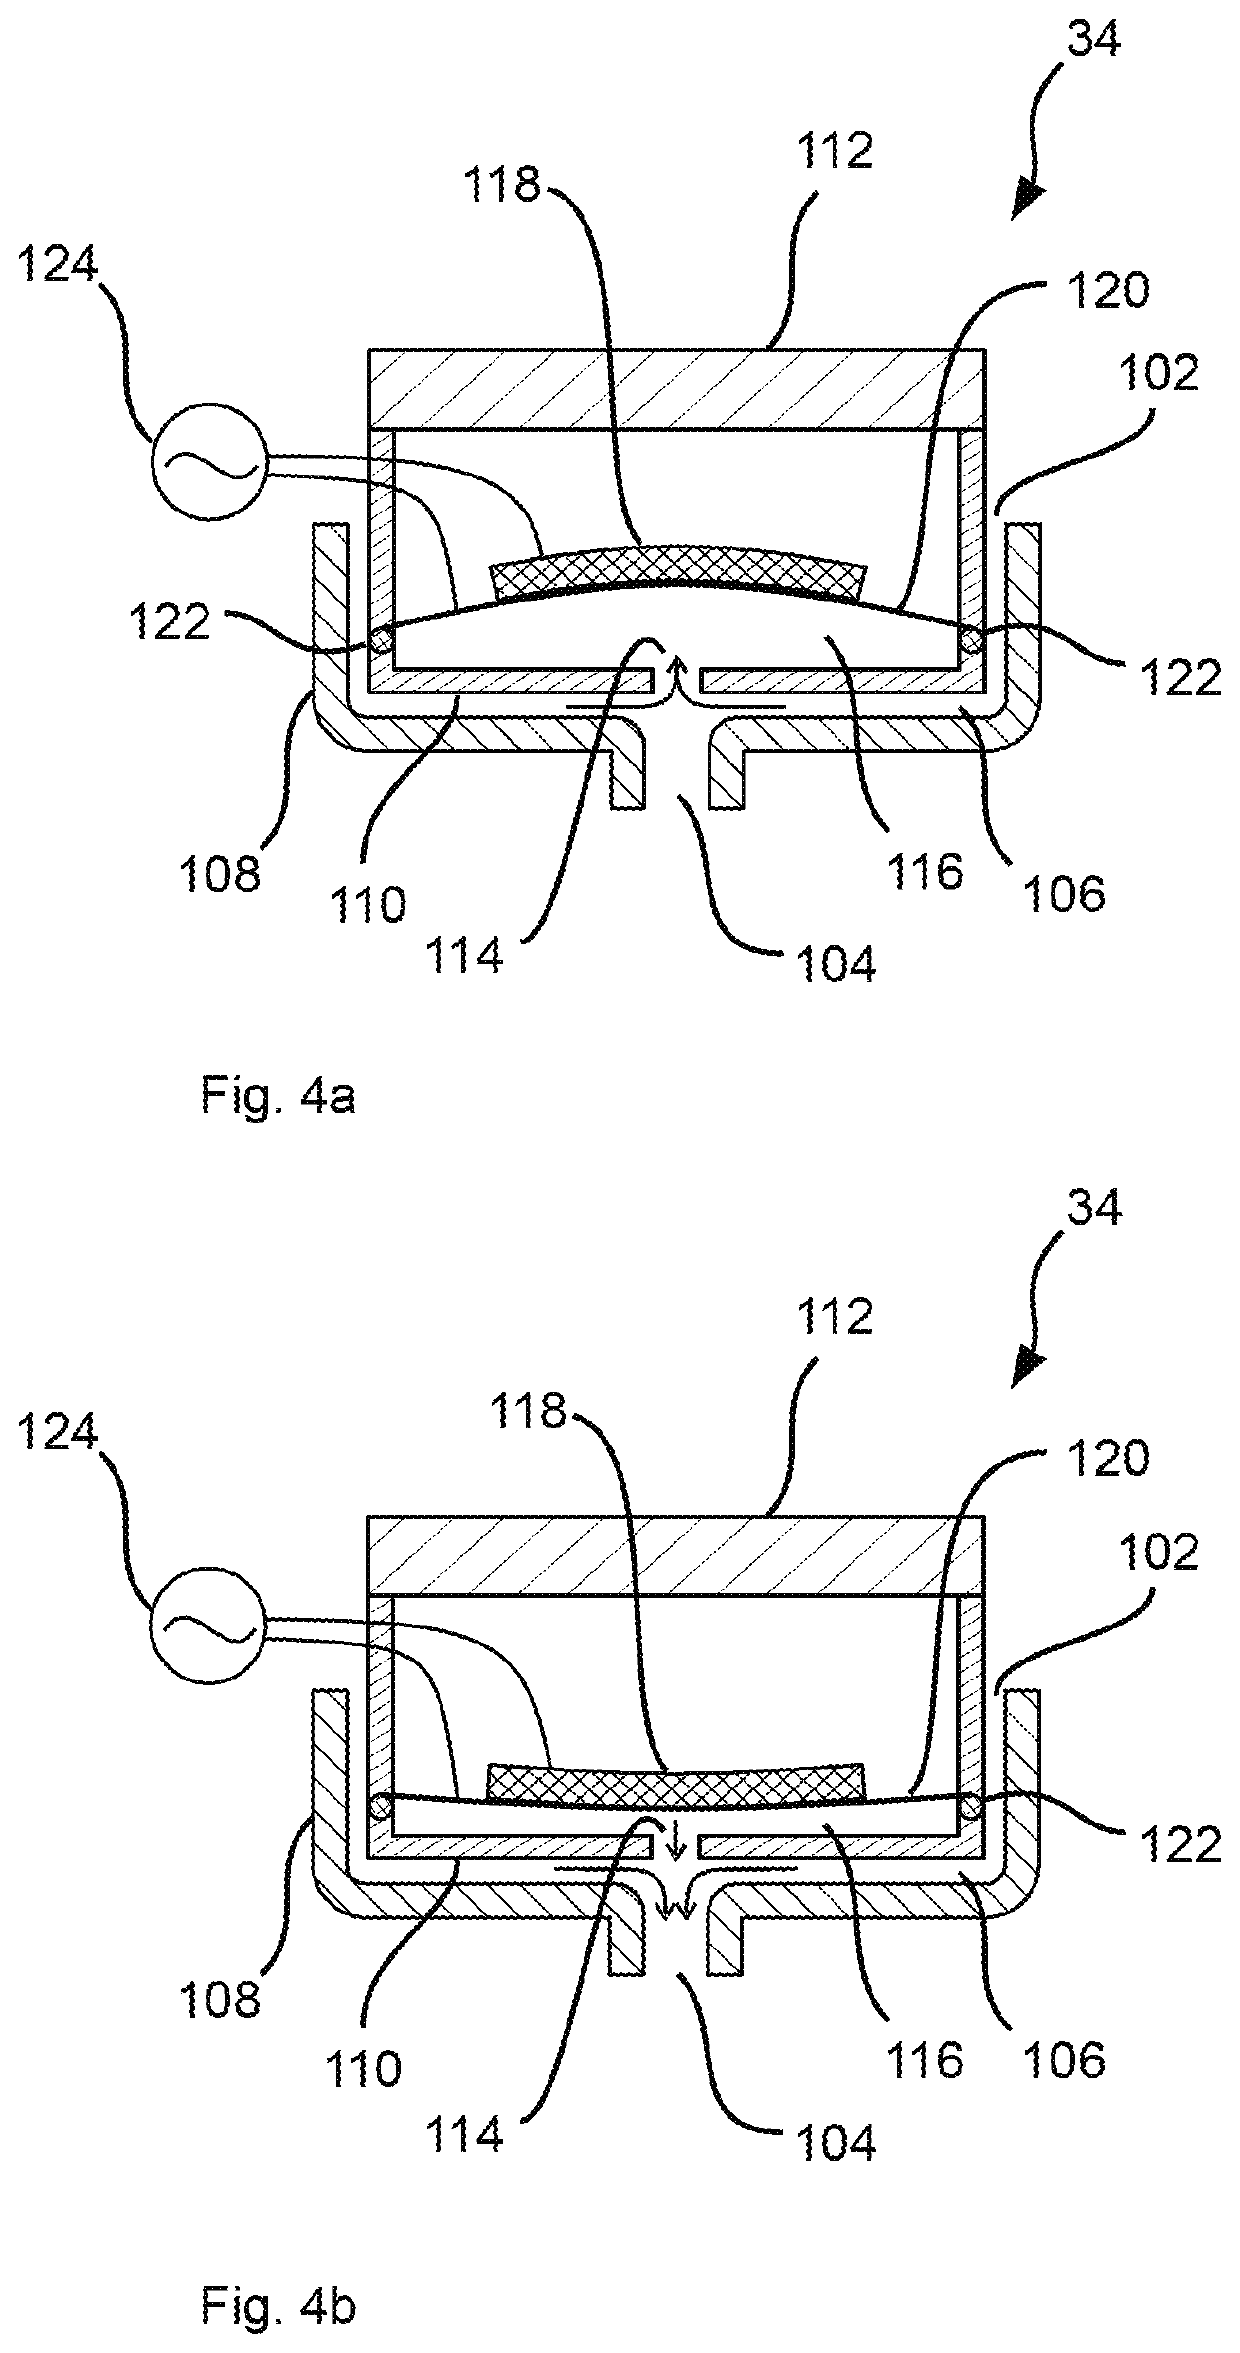 Process and device for ventilating a patient